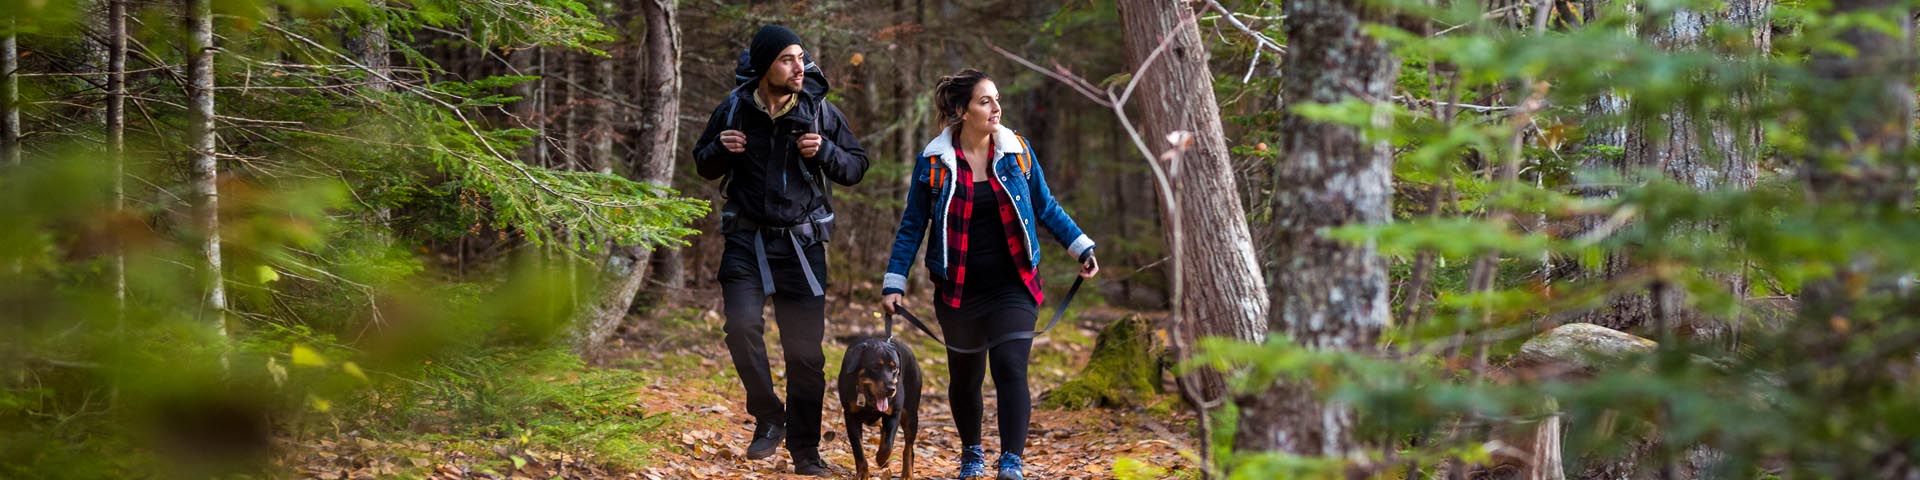 Visitors walking with their dog along the Kouchibouguac River Trail, Kouchibouguac National Park